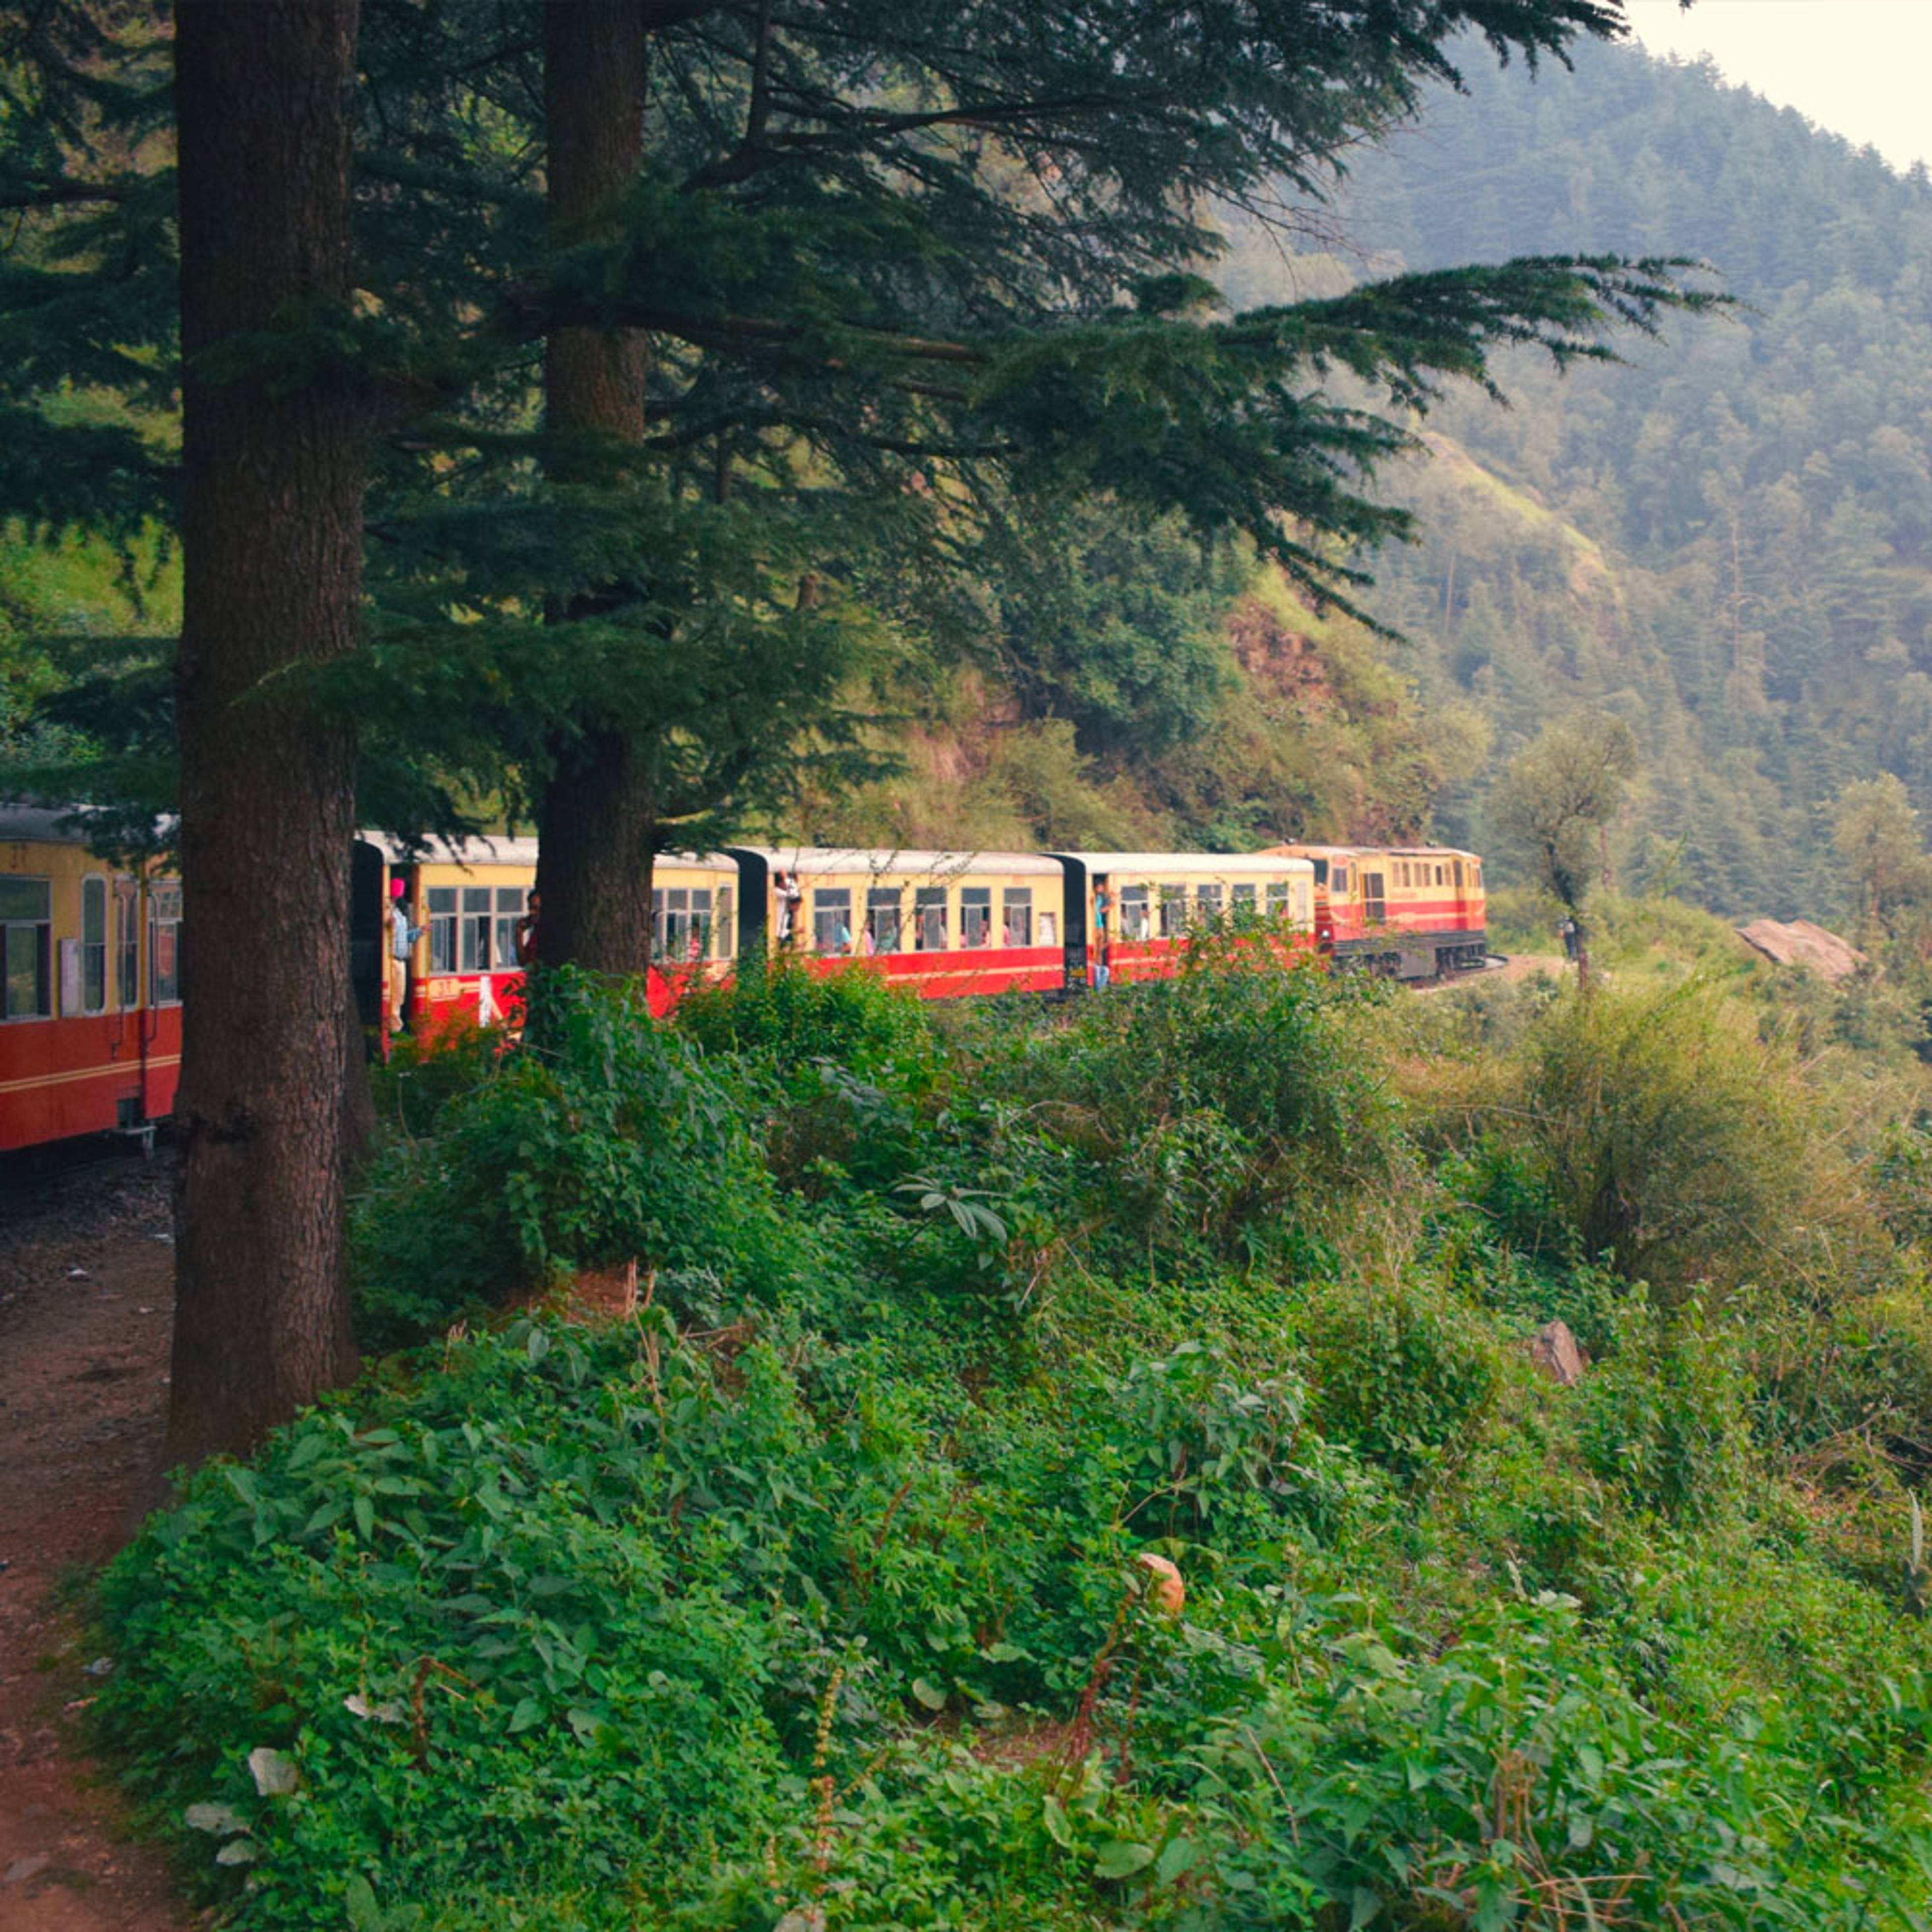 Design your perfect train tour with a local expert in India